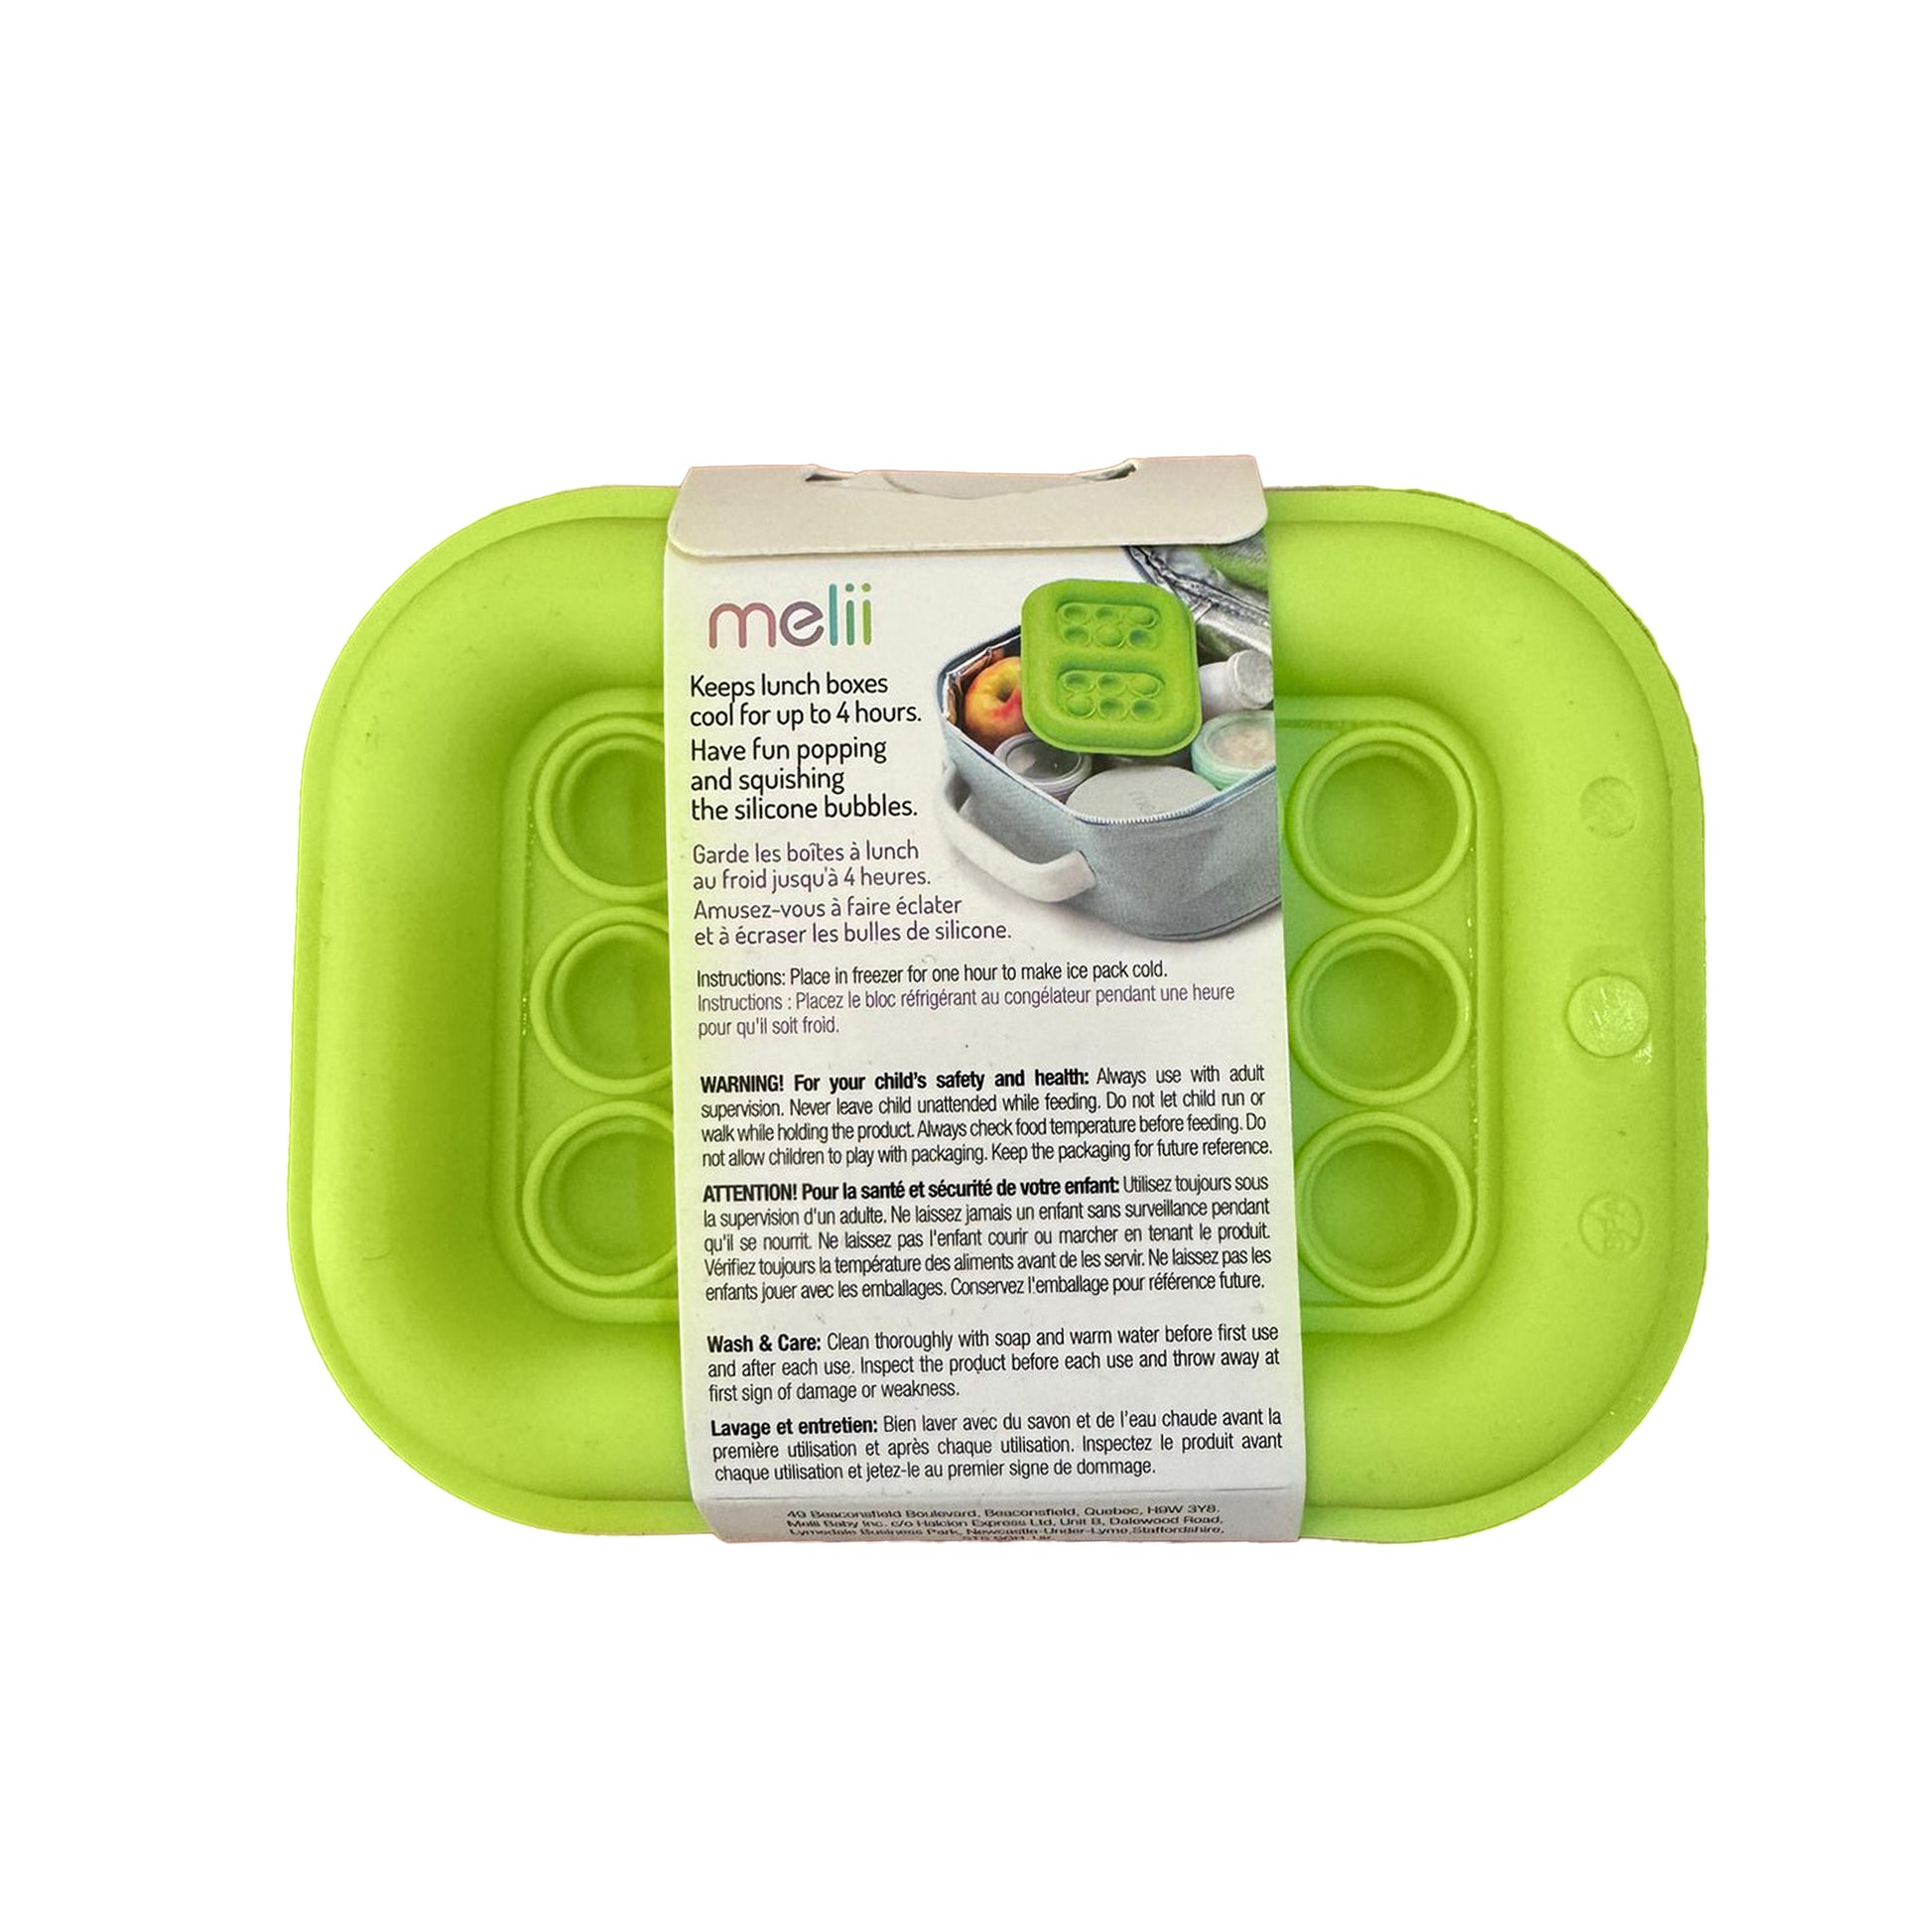 melii Turquoise & Mint Pop It Ice Pack for Kids Pack of 2 - Dual Purpose Fidget Toy and Cooling Solution - Reusable, Slim Design - Keeps Meals Fresh for up to 4 Hours - Perfect for Snack Time, Lunch Boxes